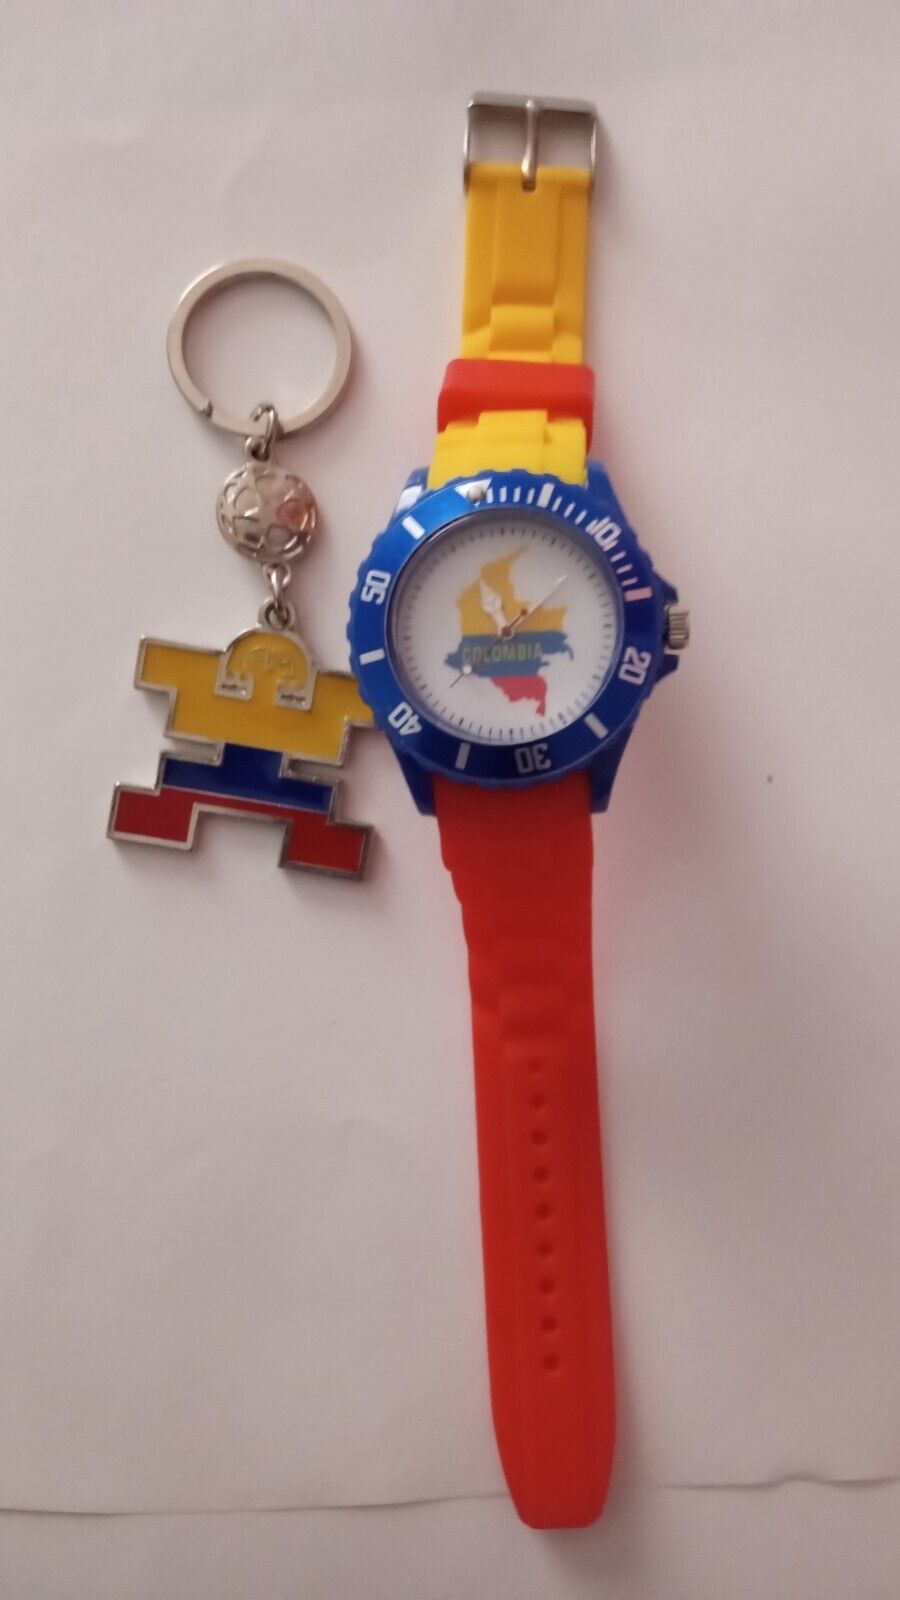 2 COLOMBIA GIFTS ( 1  COLOMBIA WATCH + 1  COLOMBIA KEYCHAIN) $28.50